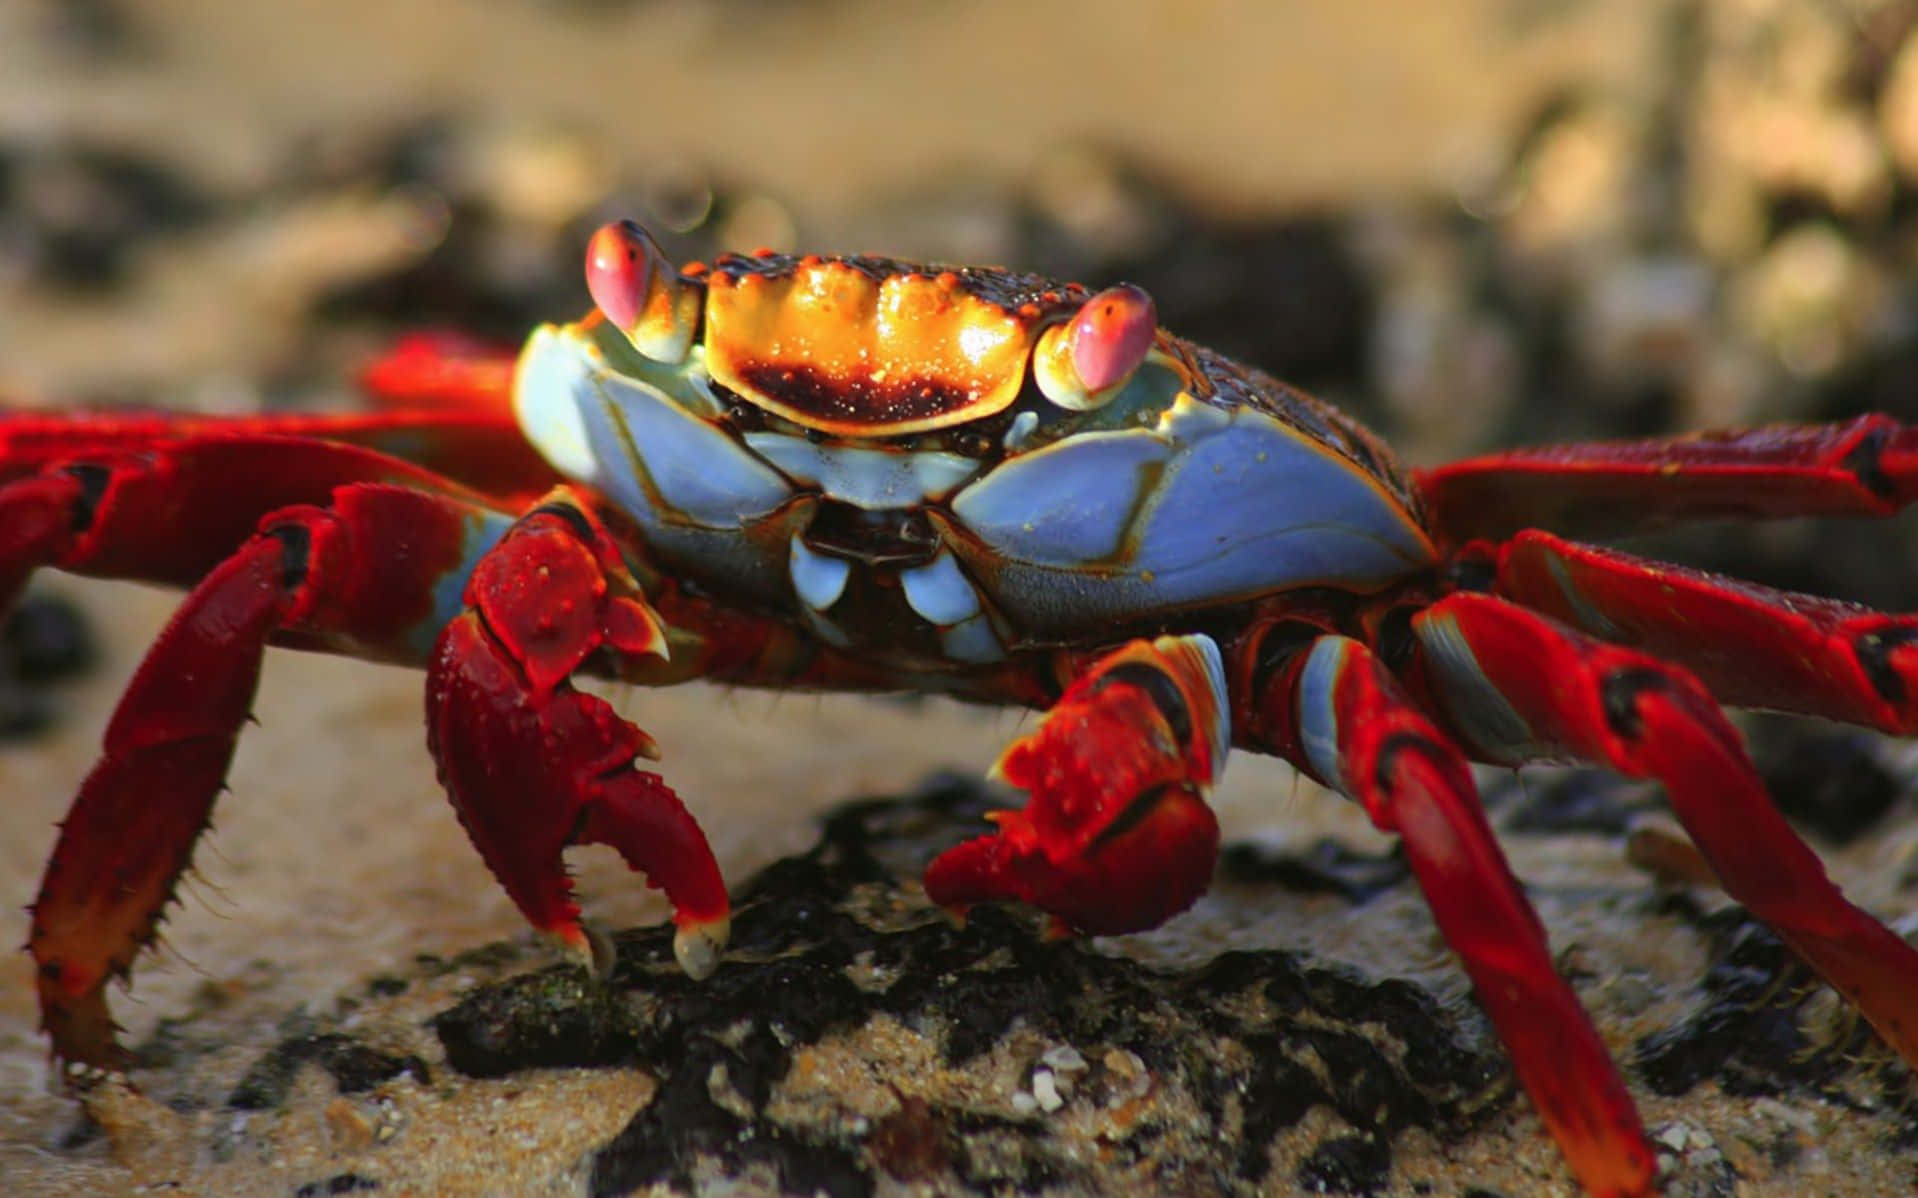 A bright-red crab atop a pile of white sand